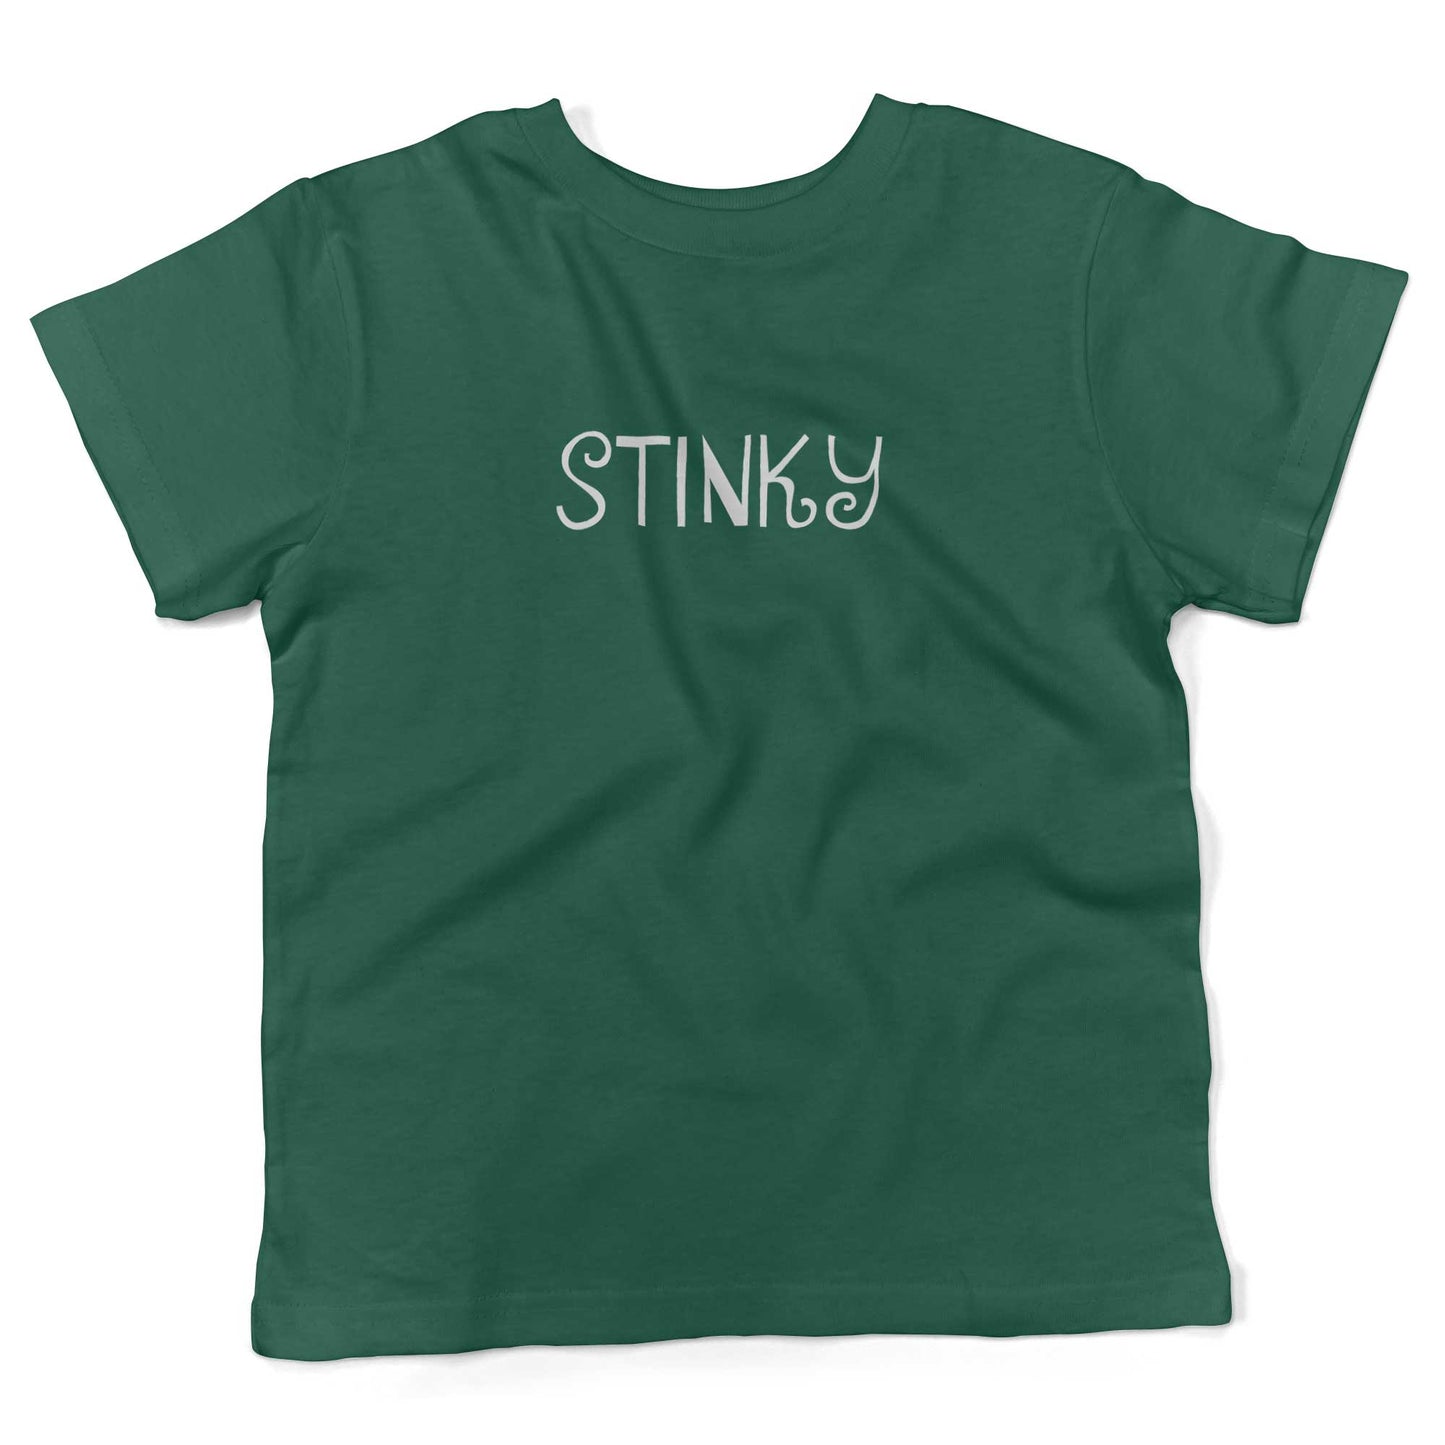 Stinky Toddler Shirt-Kelly Green-2T